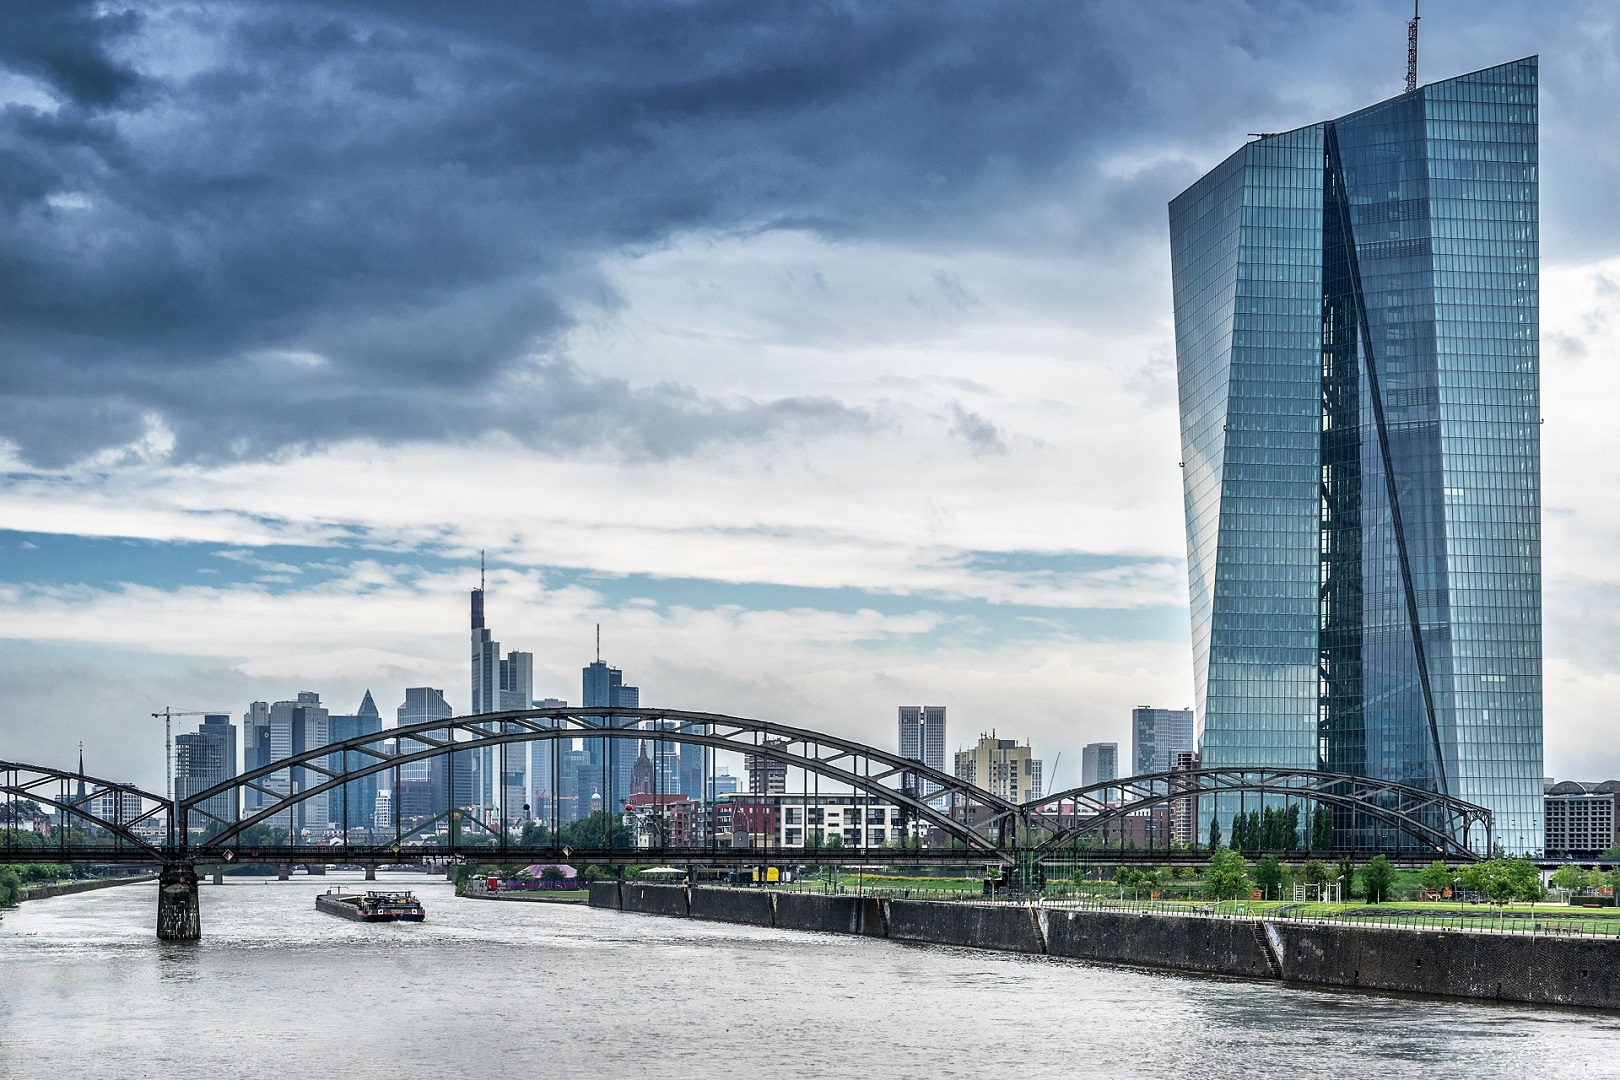 Central Europe industrial future remains bright